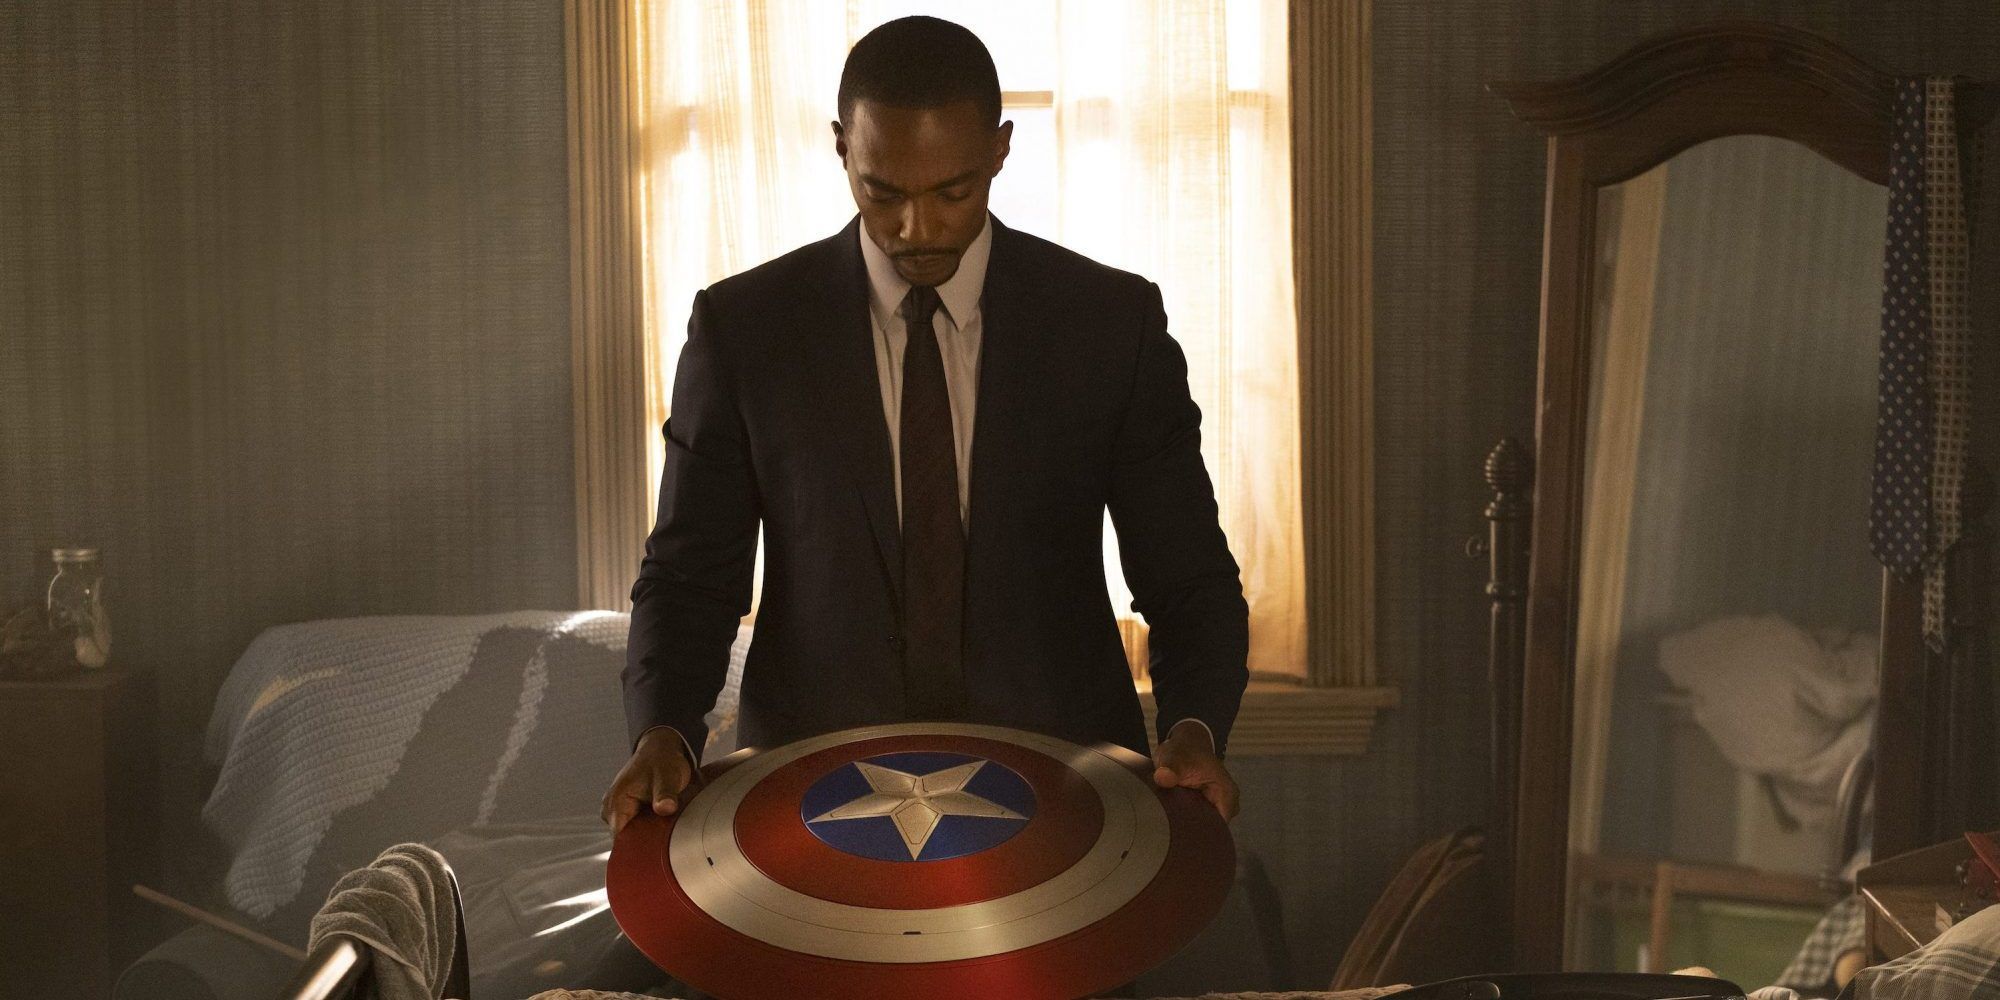 Sam Wilson holds the shield in The Falcon and the Winter Soldier.